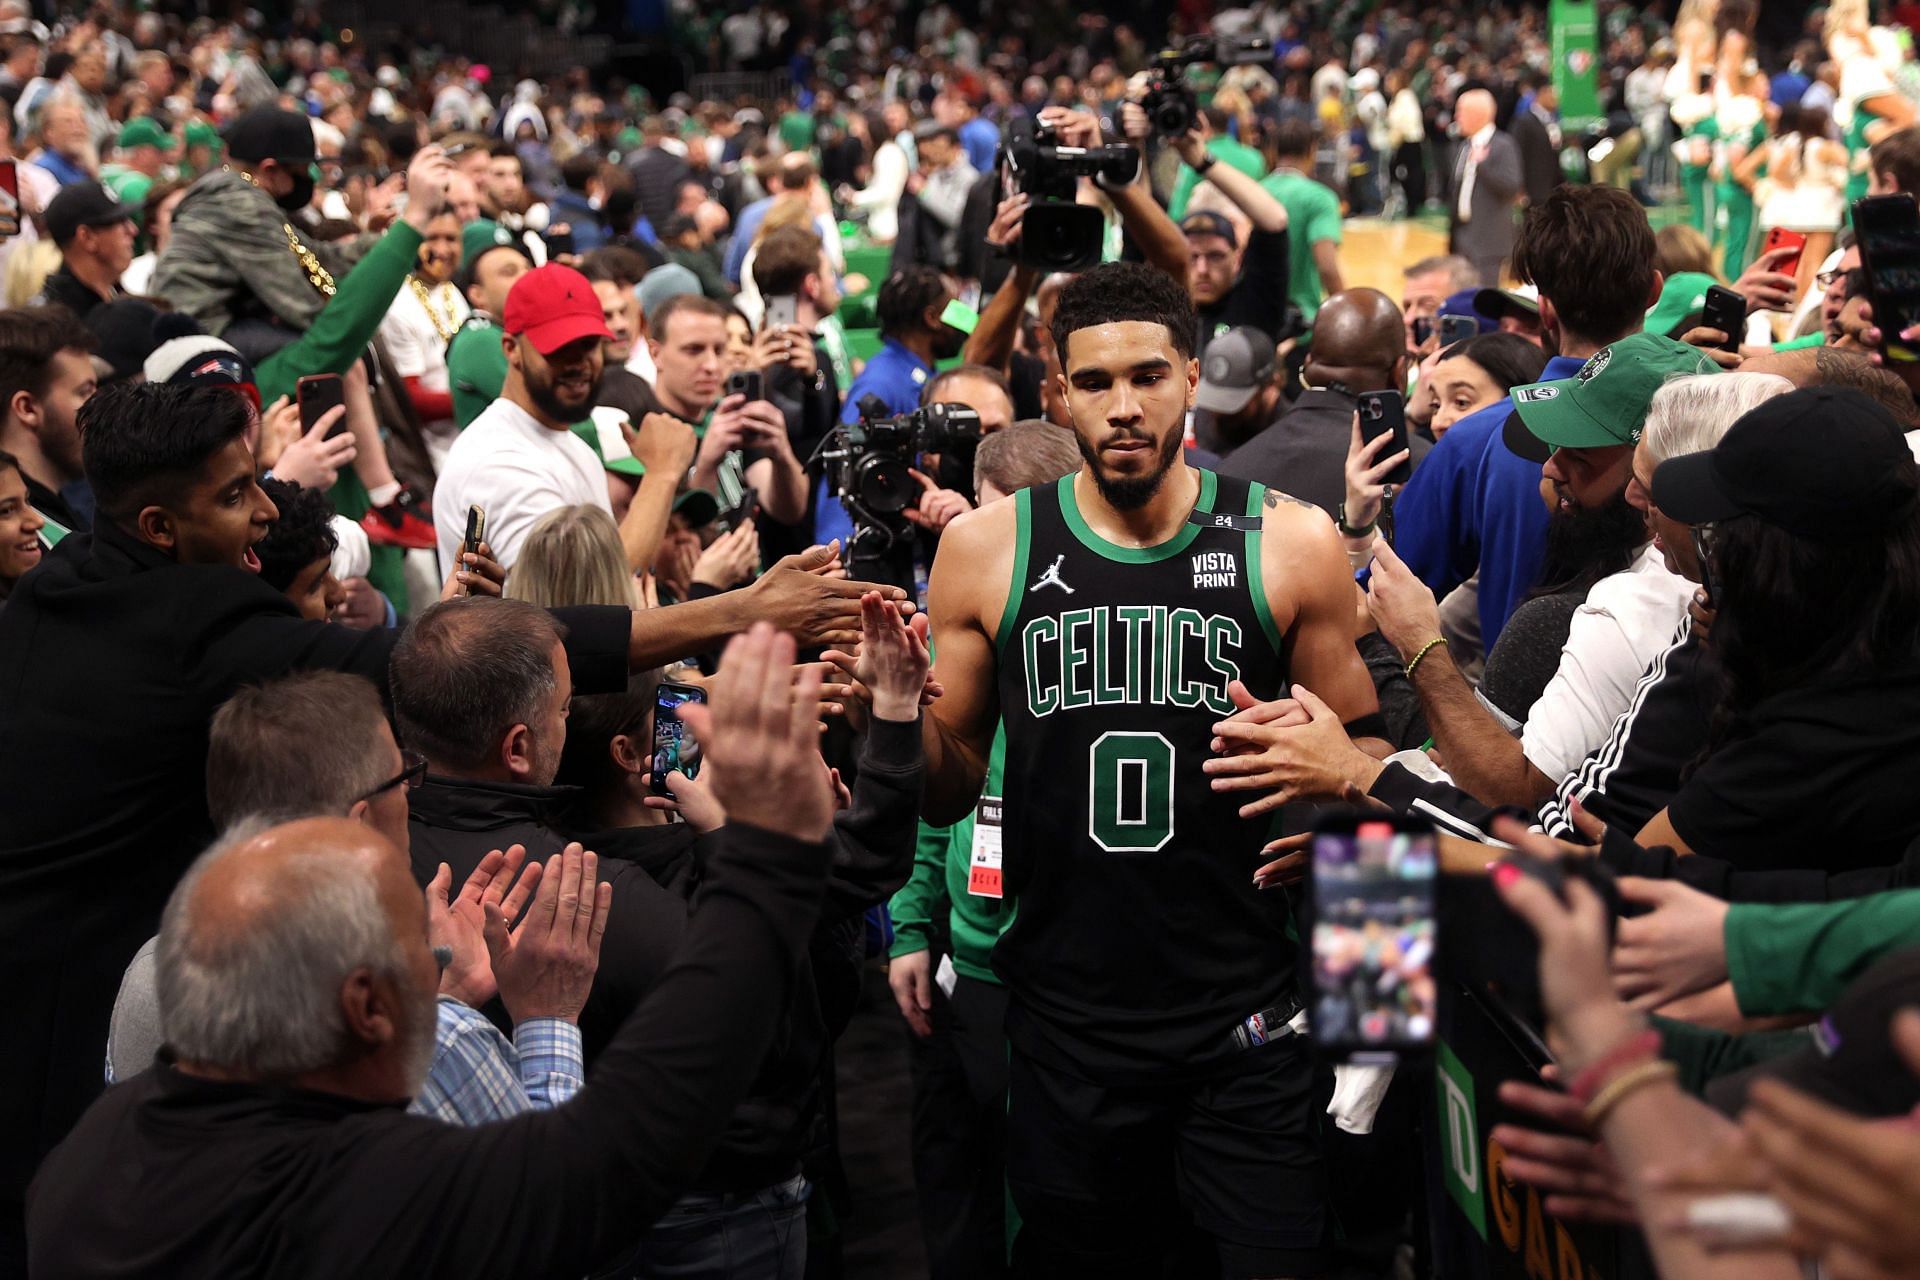 Celtics fans were vocal in game one and will be the same in-game two